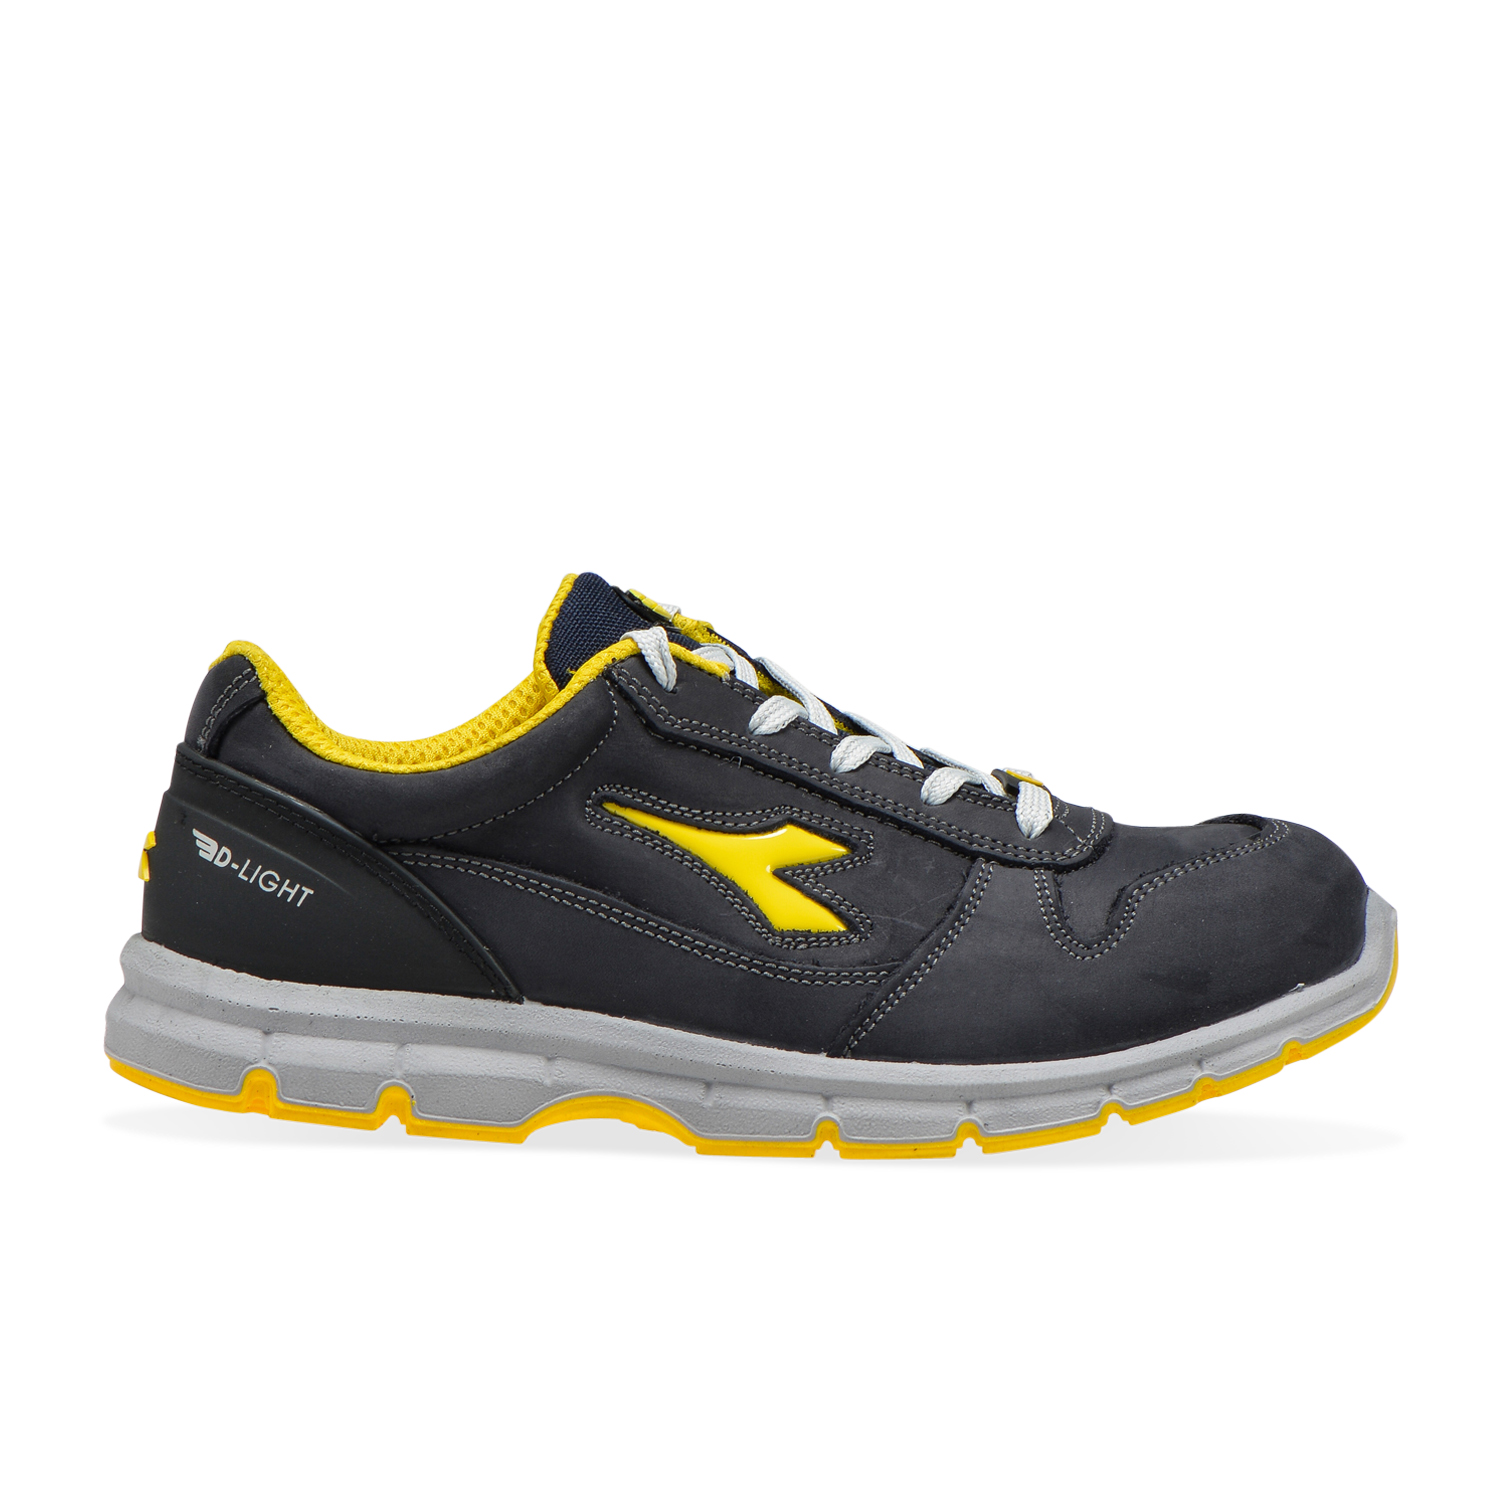 Utility Diadora - Low work shoe RUN II LOW S3 SRC ESD for man and woman ...